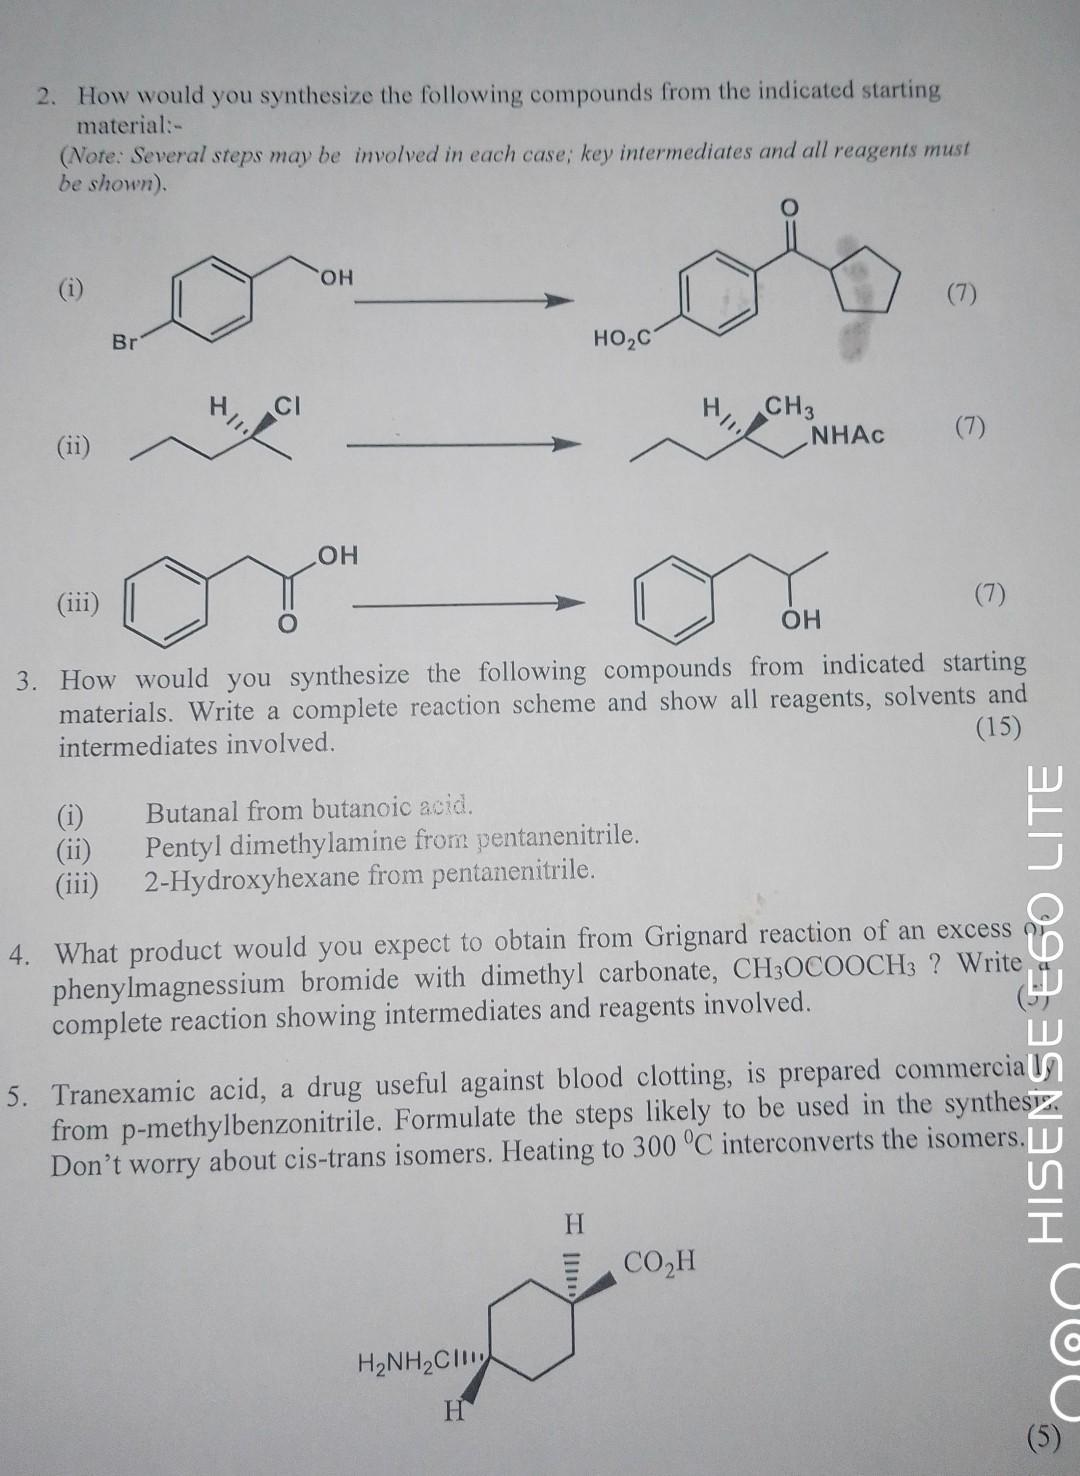 2. How would you synthesize the following compounds from the indicated starting material:- (Note: Several steps may be involv